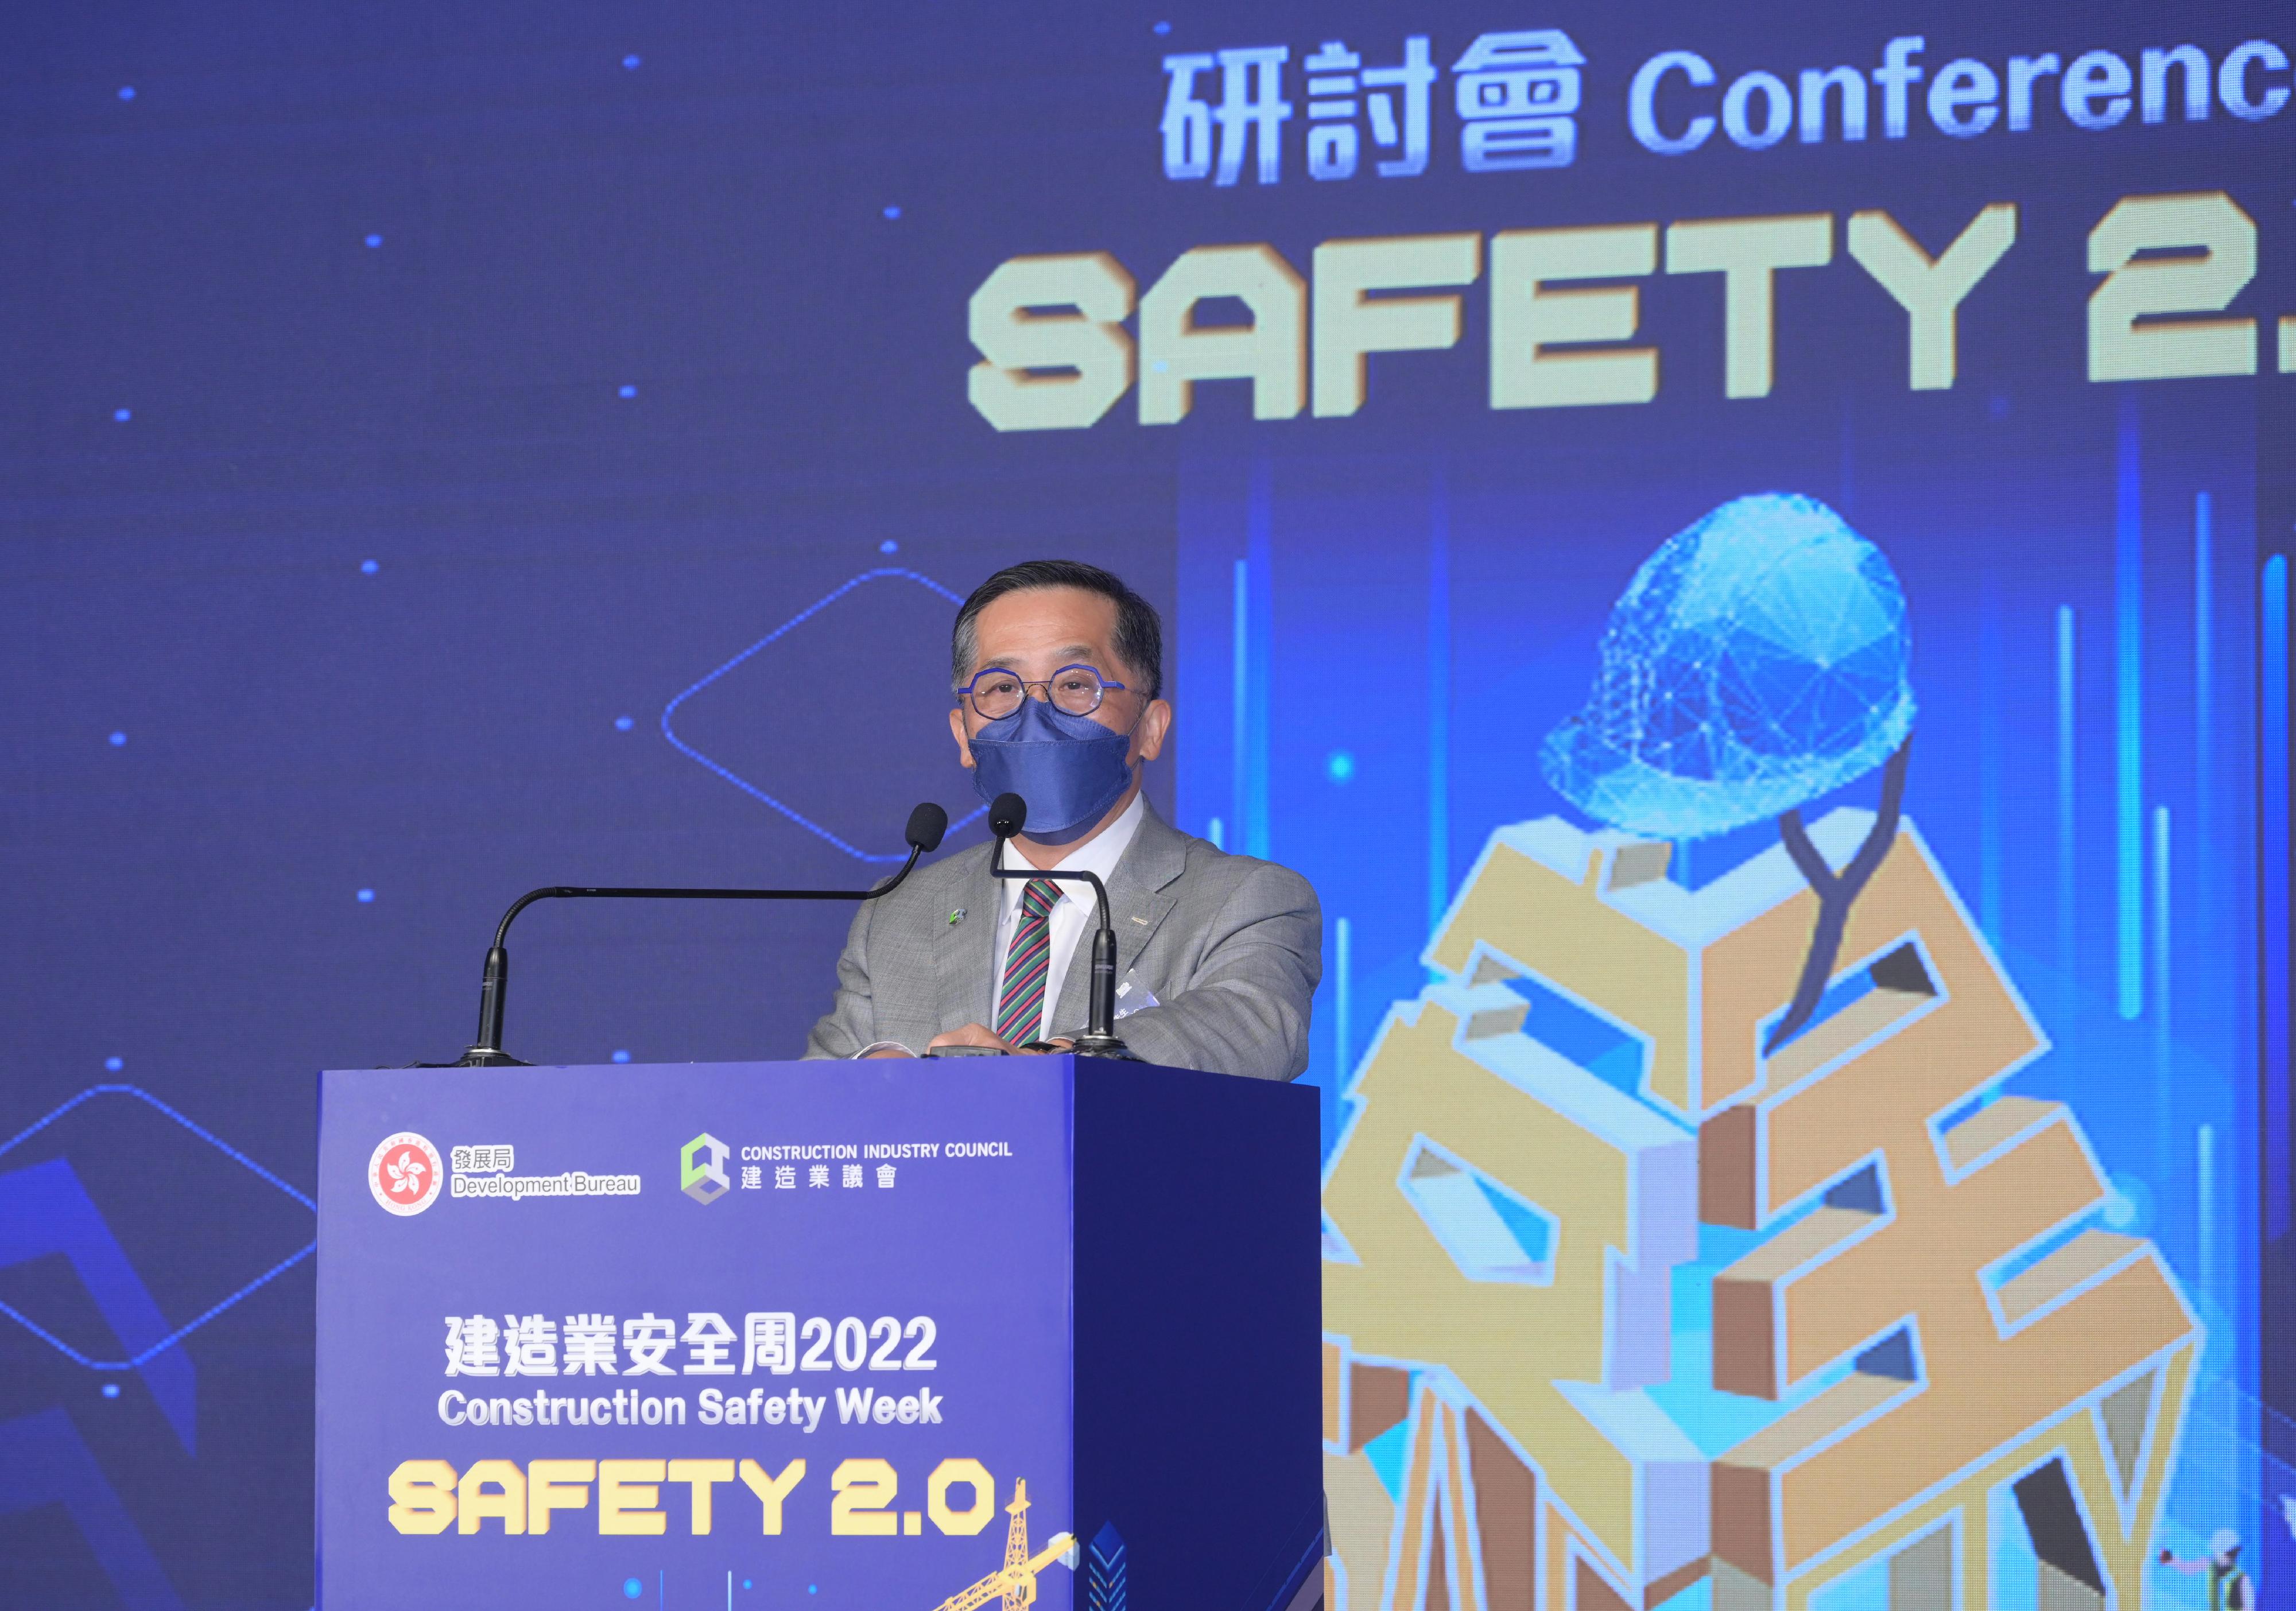 Construction Safety Week 2022 is being held from today (August 29) to September 2. Photo shows the Chairman of the Construction Industry Council, Mr Thomas Ho, speaking at the kick-off ceremony.